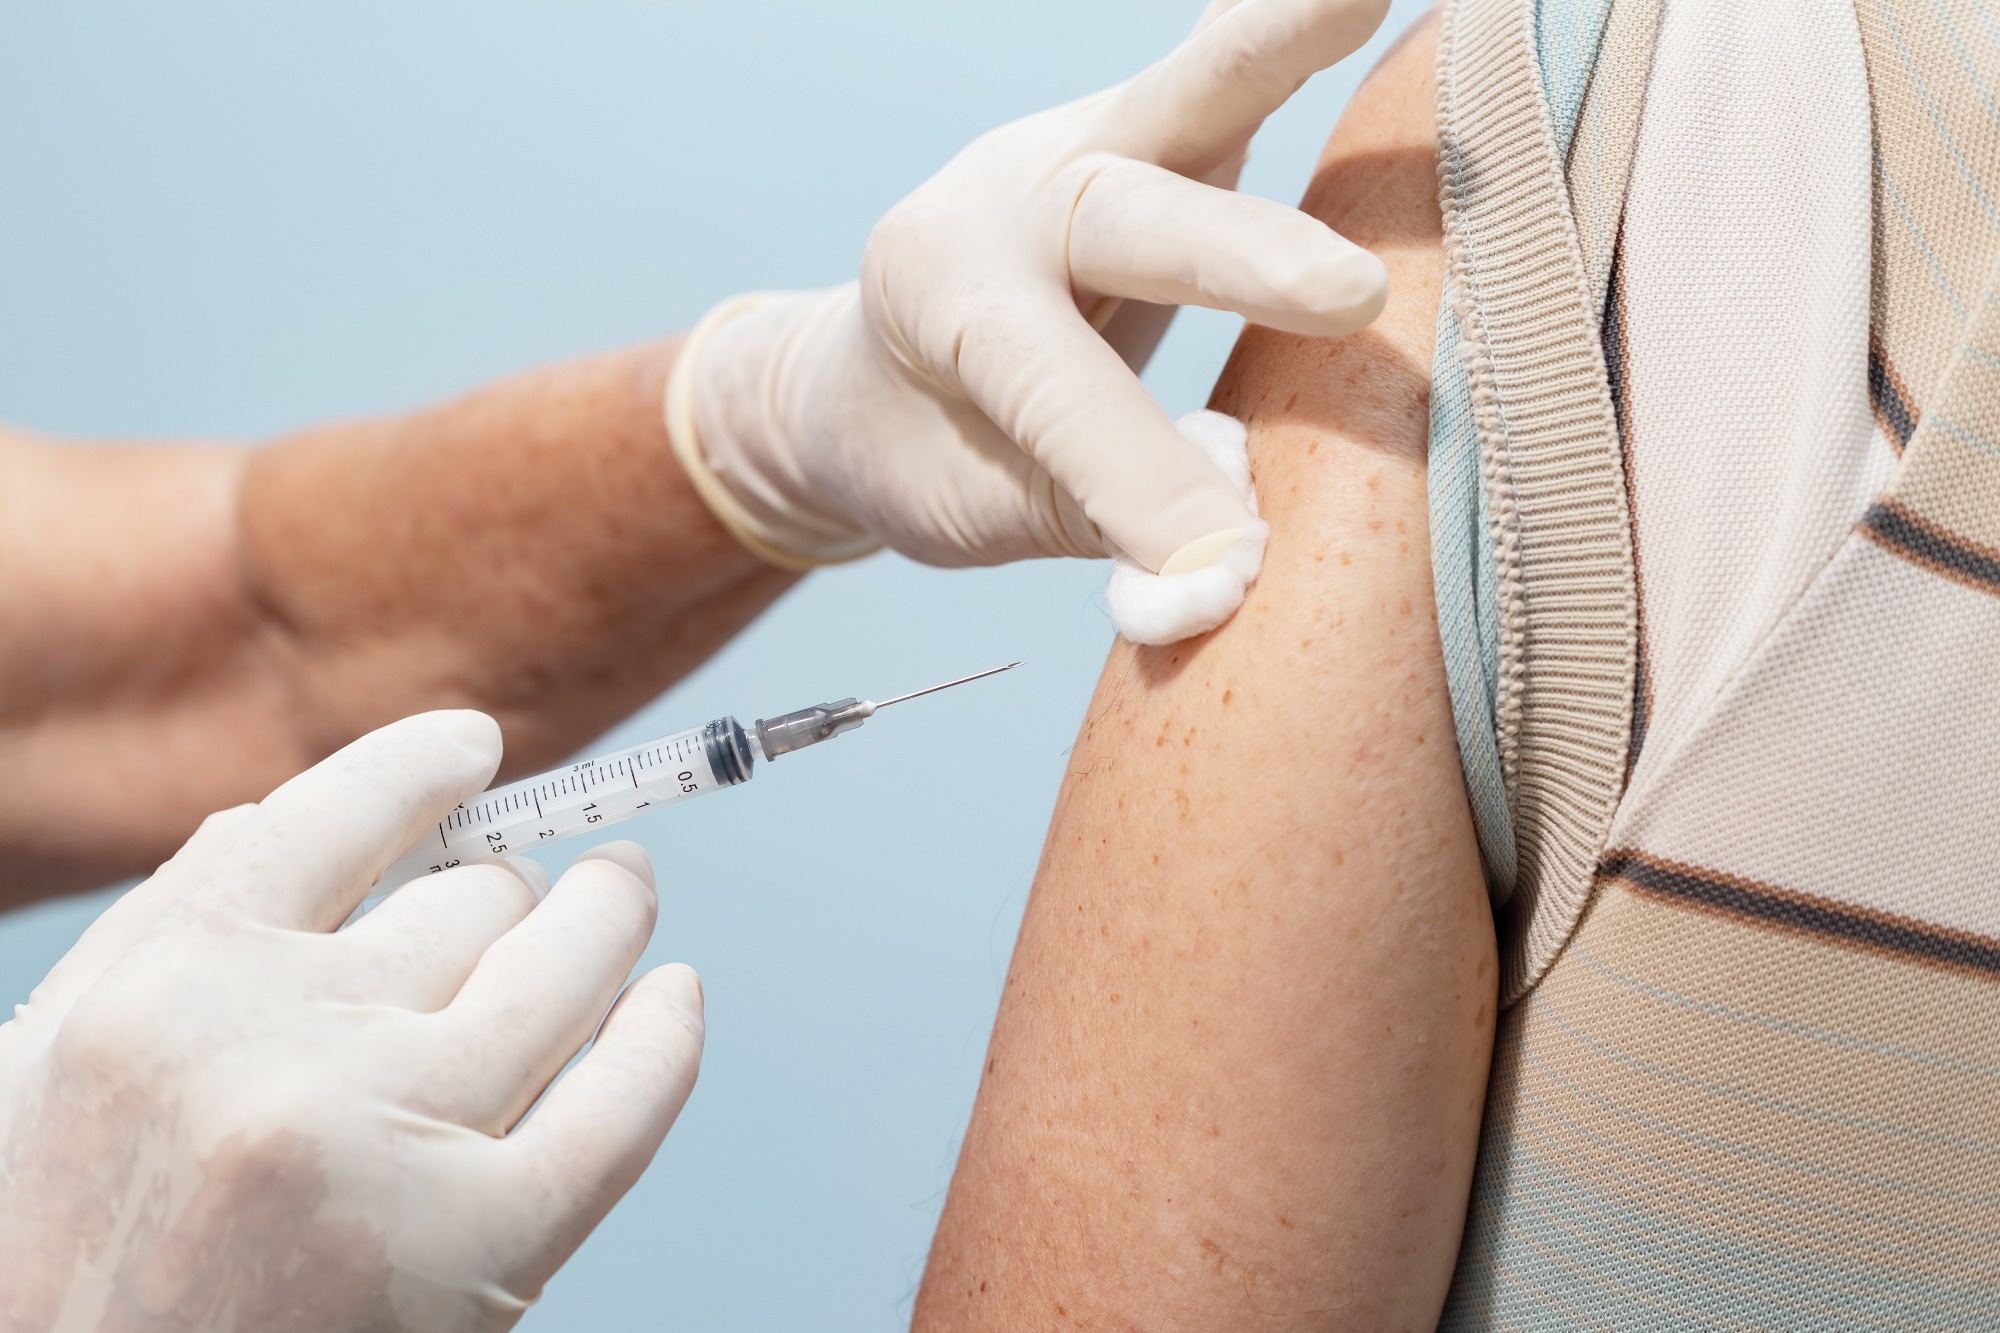 Study: Intra-season waning of immunity following the seasonal influenza vaccine in early and late vaccine recipients. Image Credit: Angela_Macario/Shutterstock